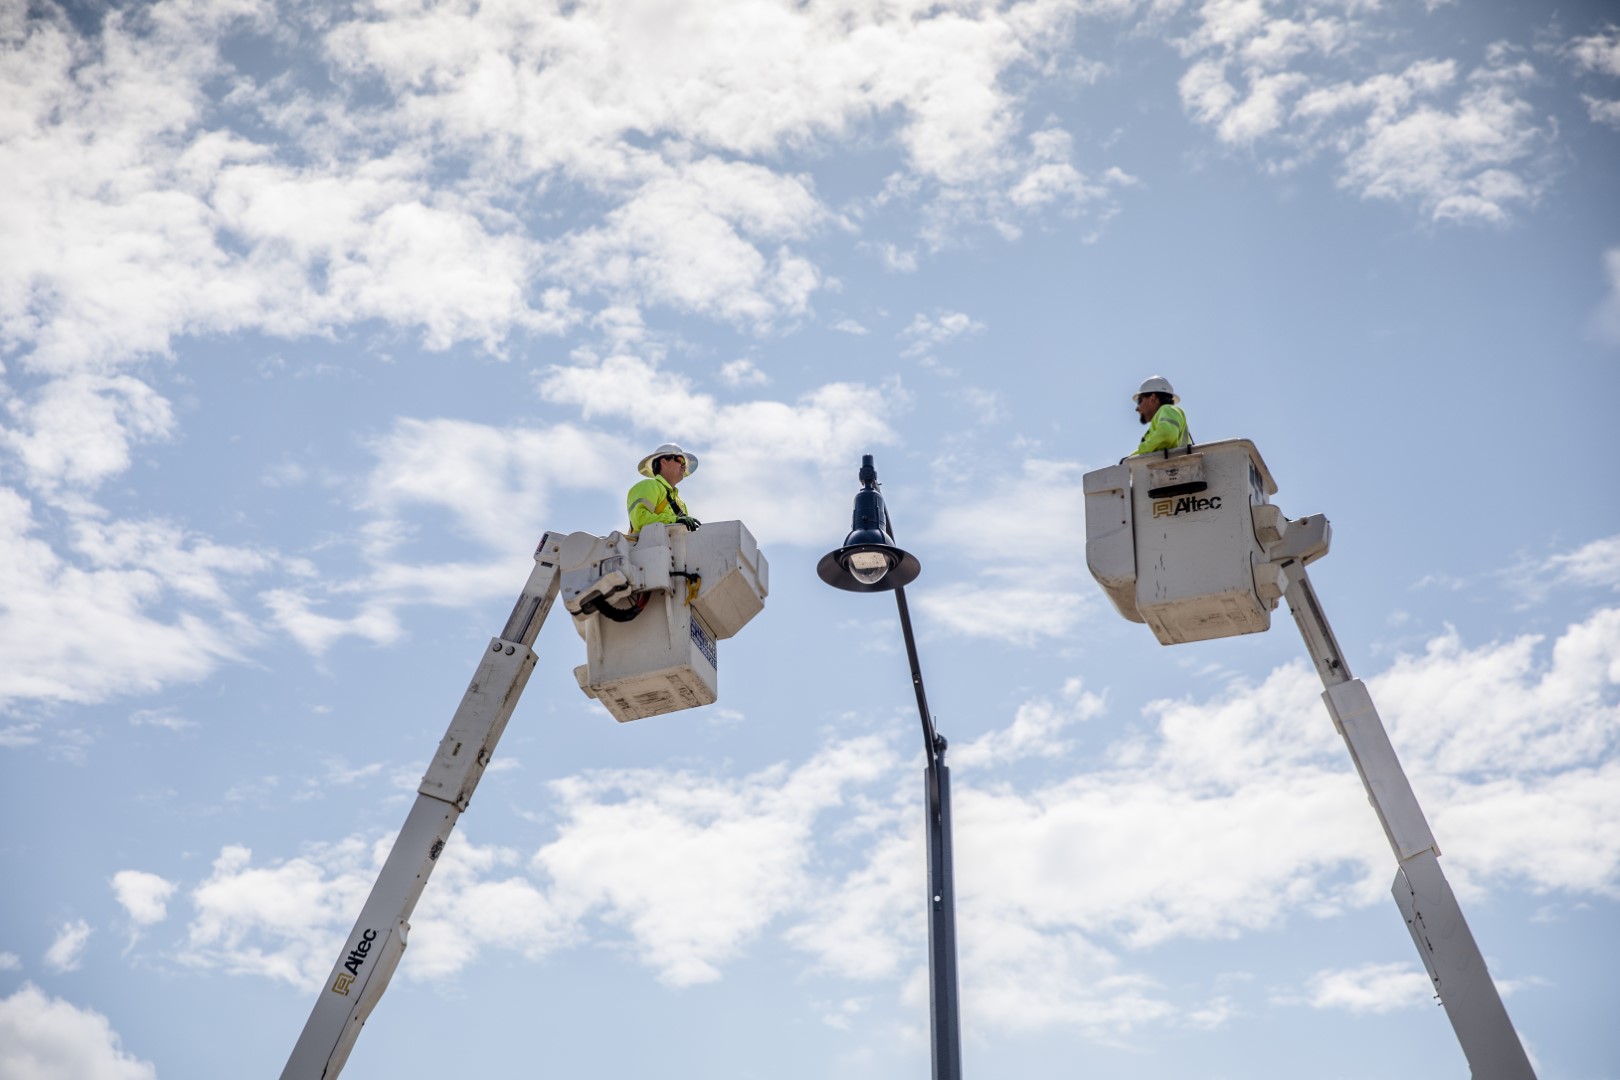 Safety at American Lighting & Signalization